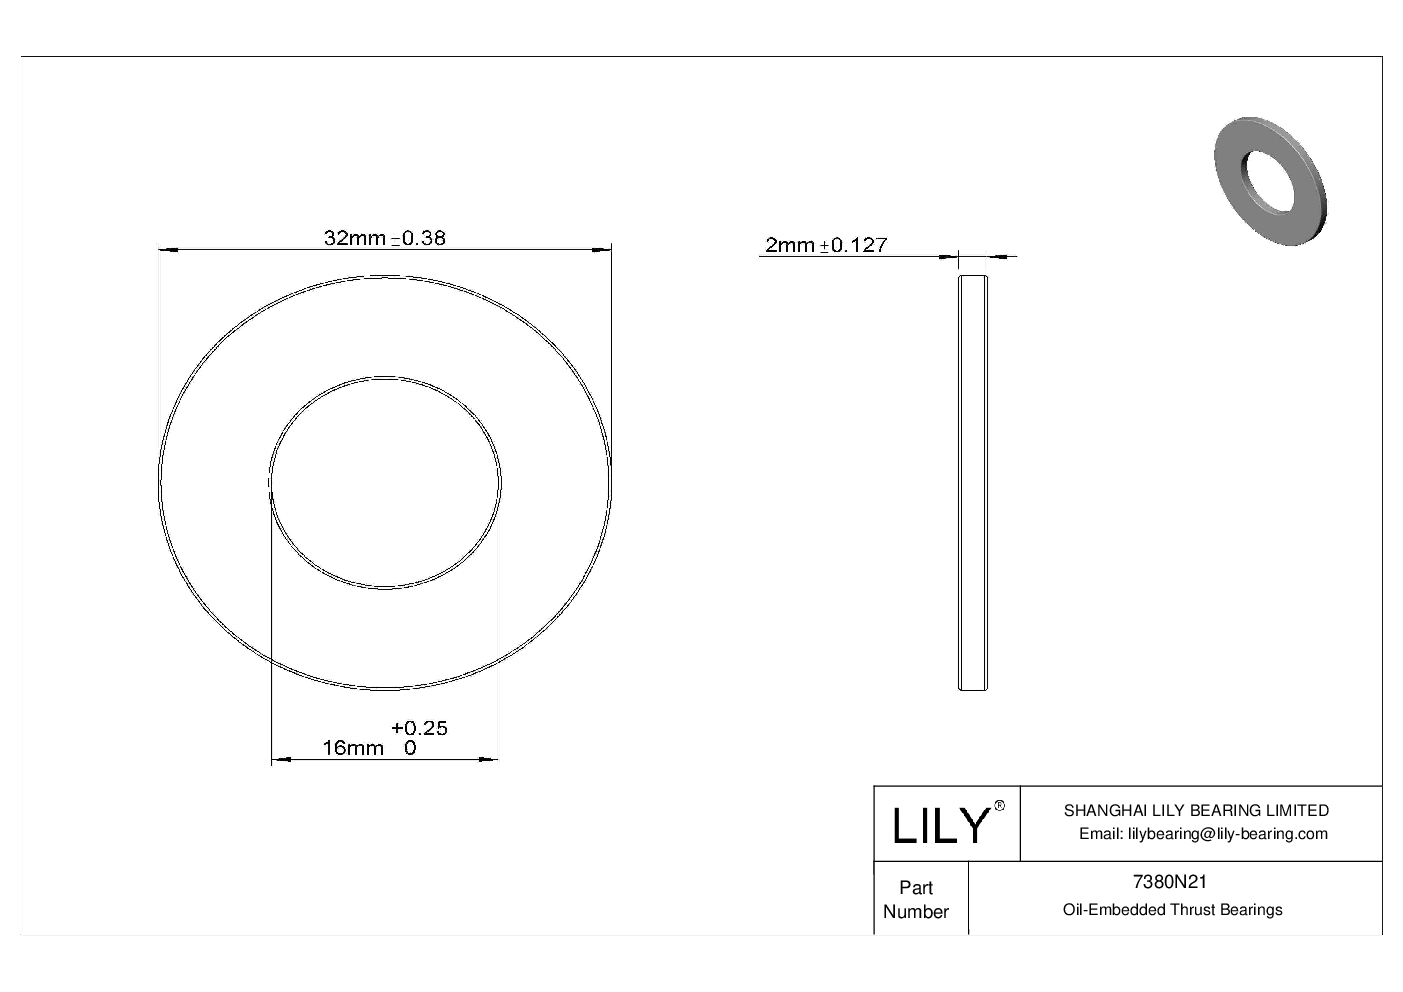 HDIANCB High-Load Ultra-Low-Friction Oil-Embedded Thrust Bearings cad drawing